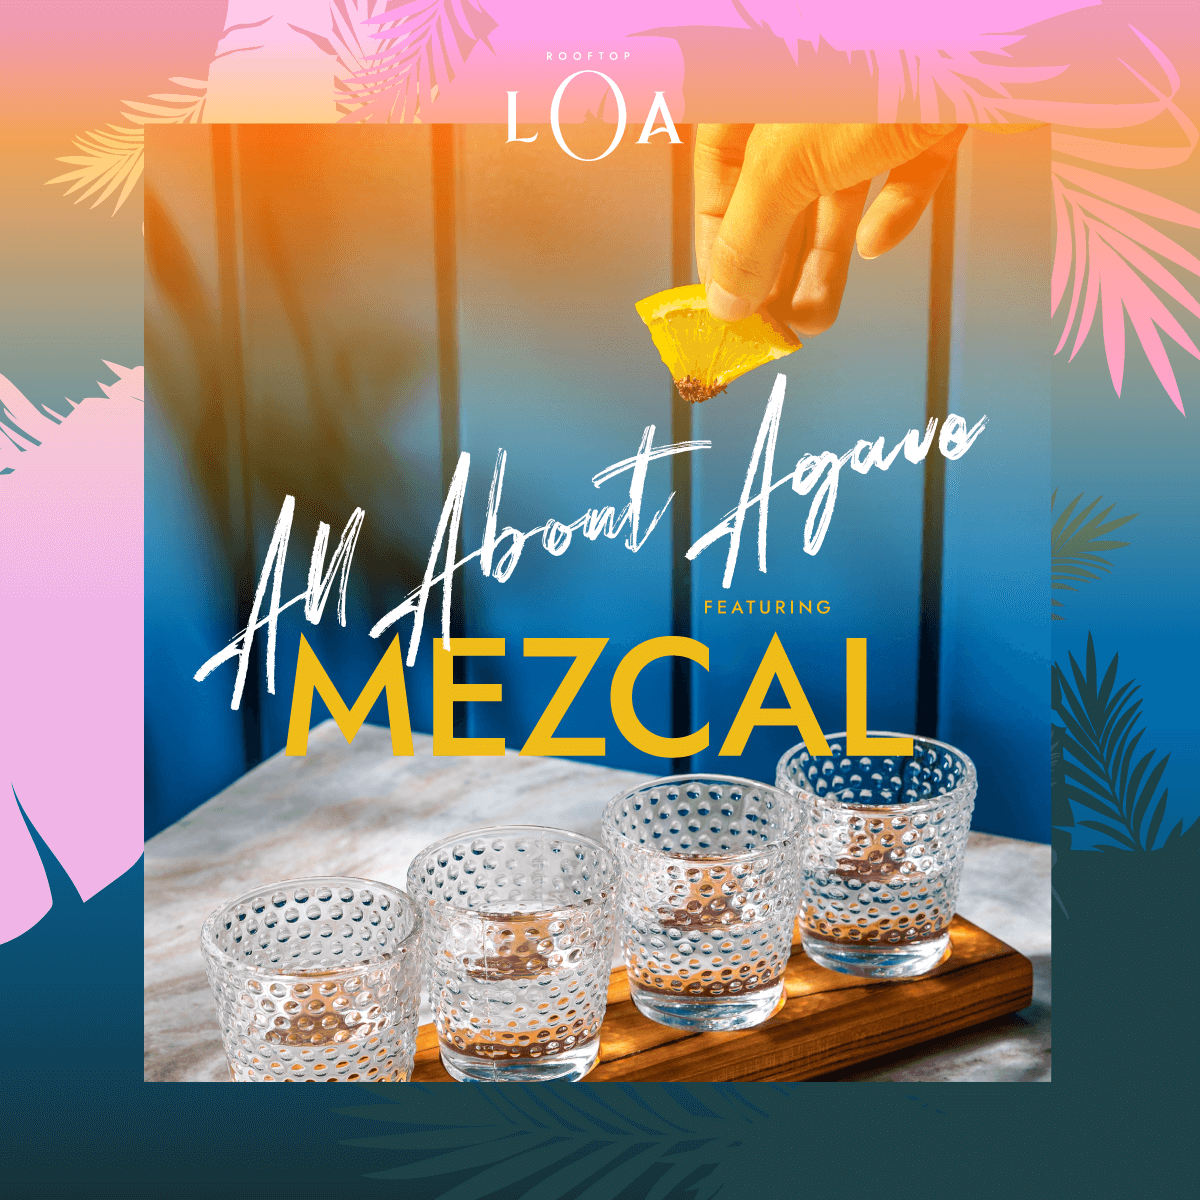 All about agave featuring Mezcal